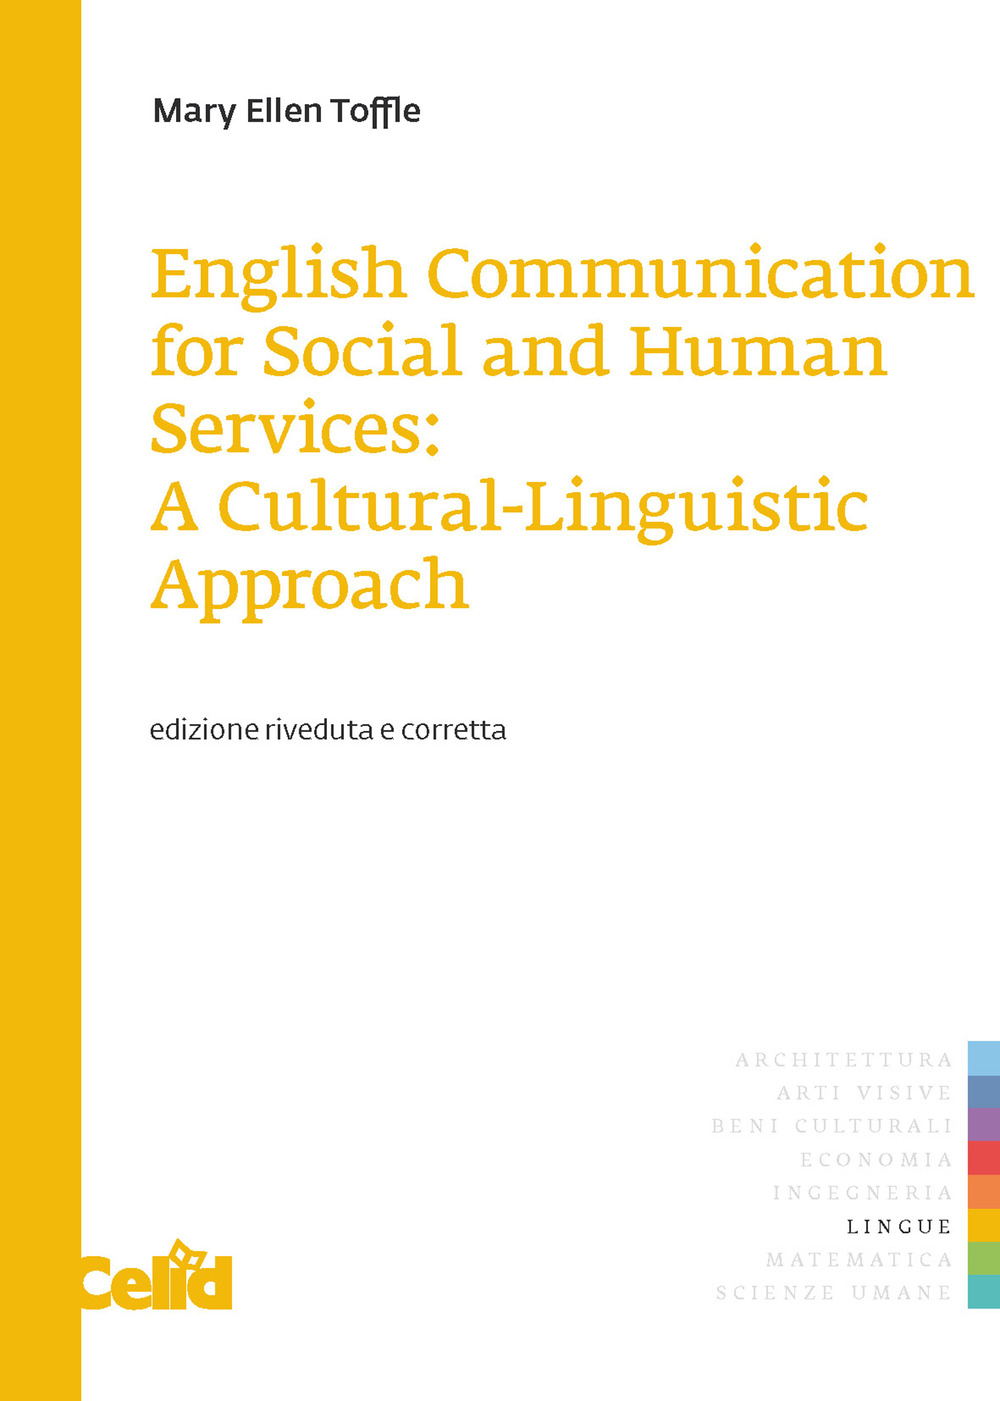 English communication for social and human services: a cultural-linguistic approach